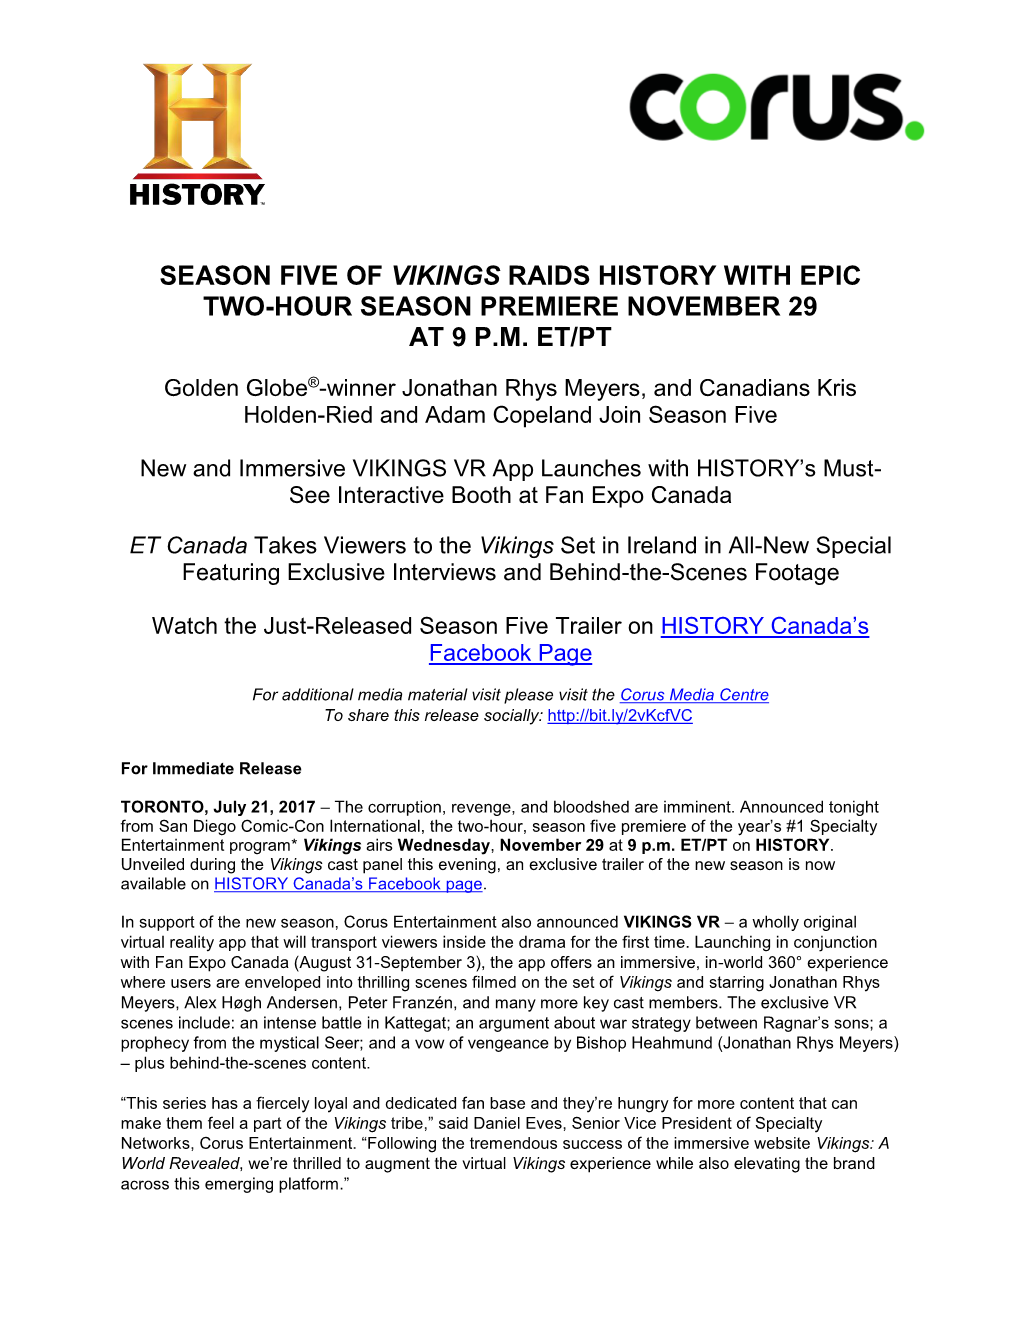 History with Epic Two-Hour Season Premiere November 29 at 9 P.M